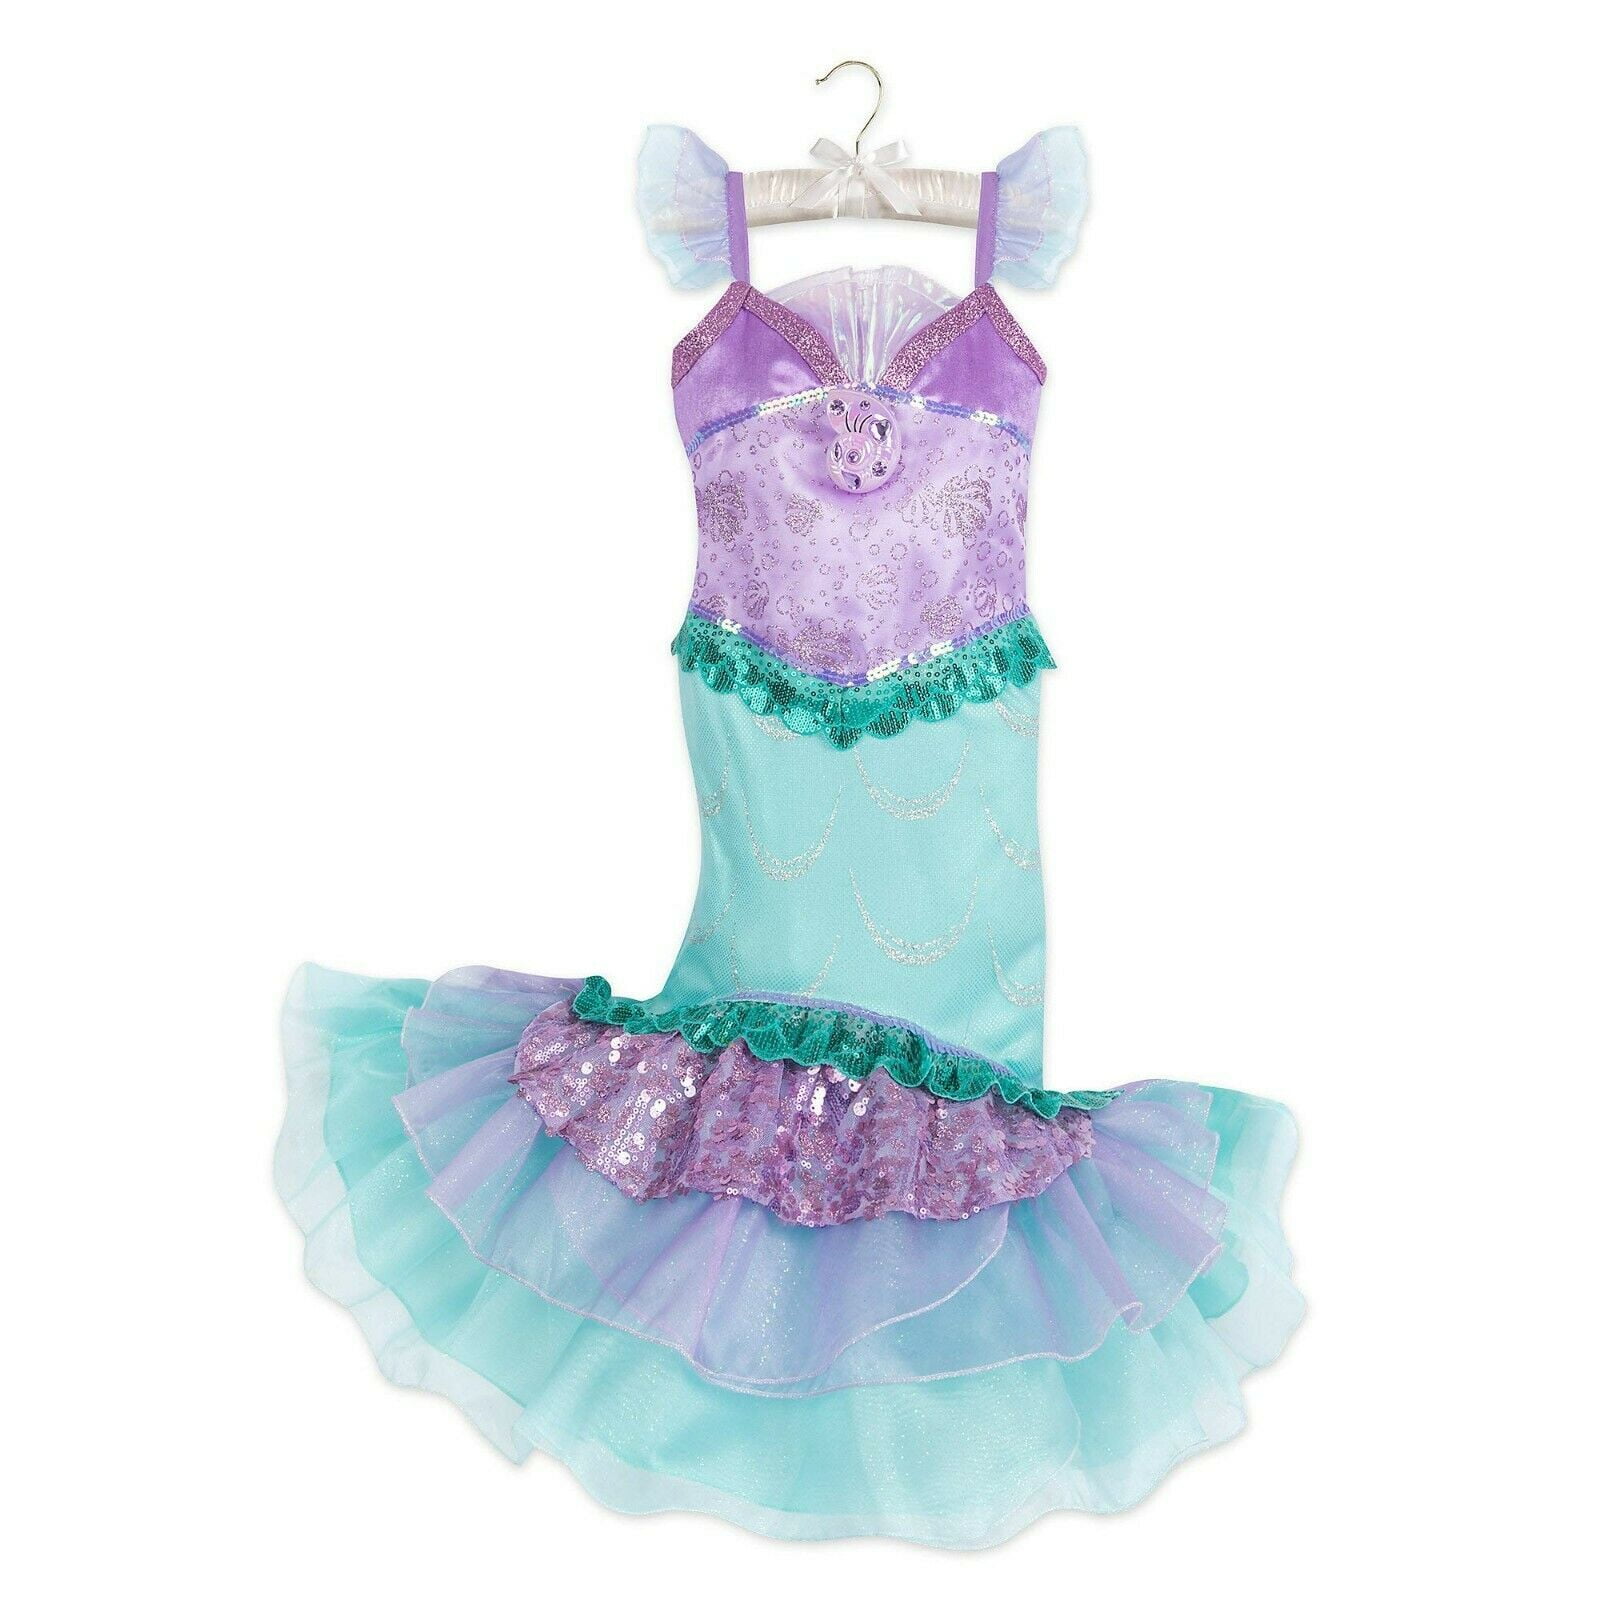 The Little Mermaid Princess Ariel Costume Dress with Sound Kids Girls Size  Large 9/10